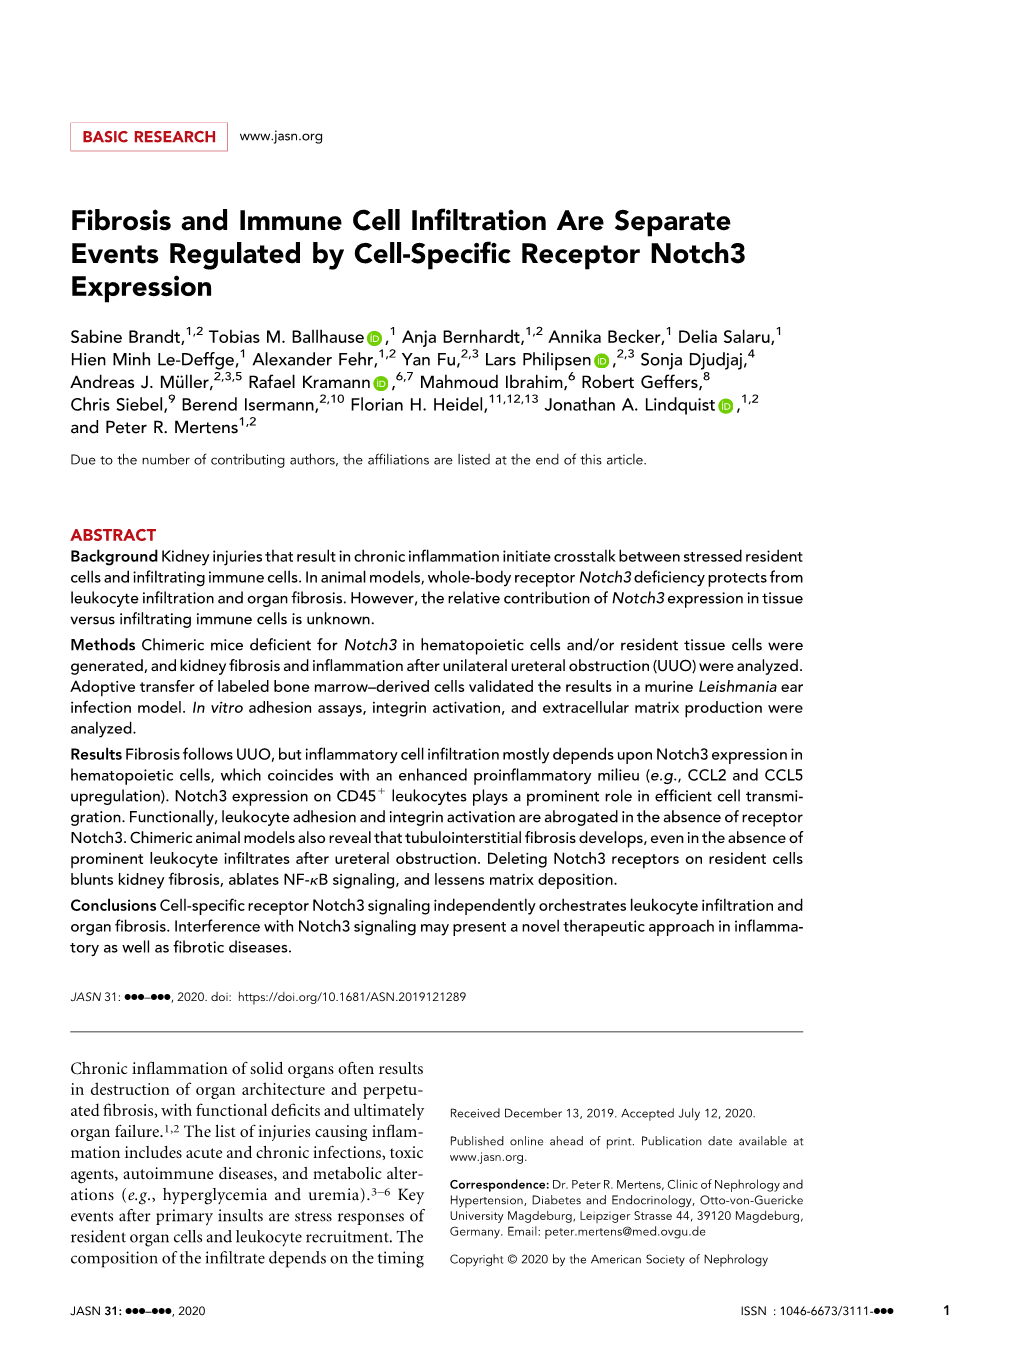 Fibrosis and Immune Cell Infiltration Are Separate Events Regulated By